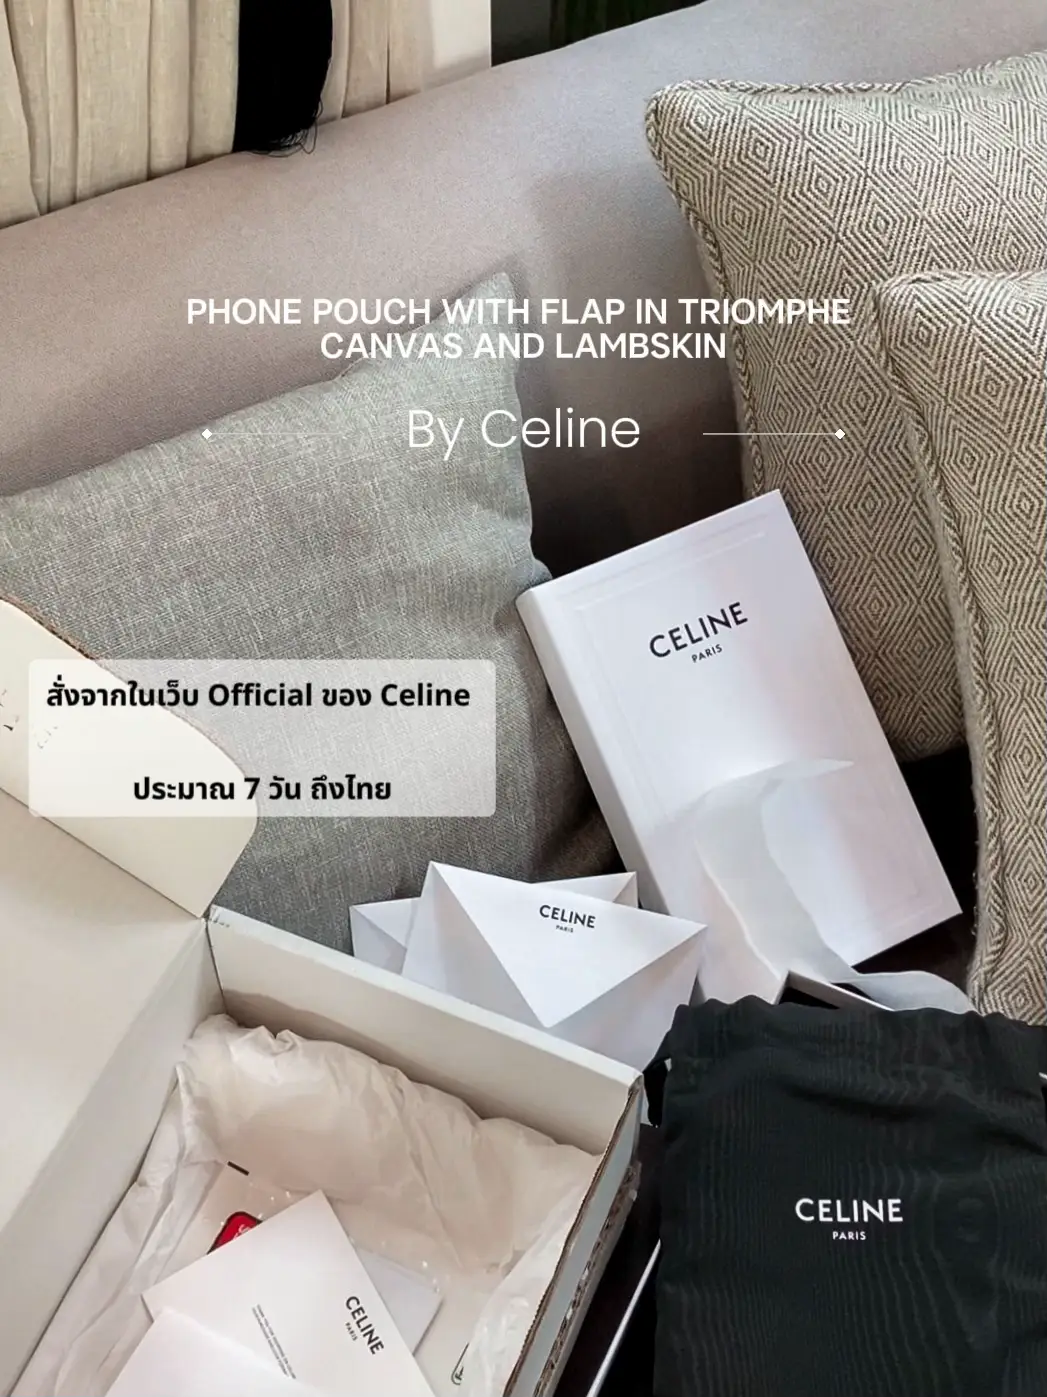 Celine phone pouch with flap in triomphe canvas and lamb skin in